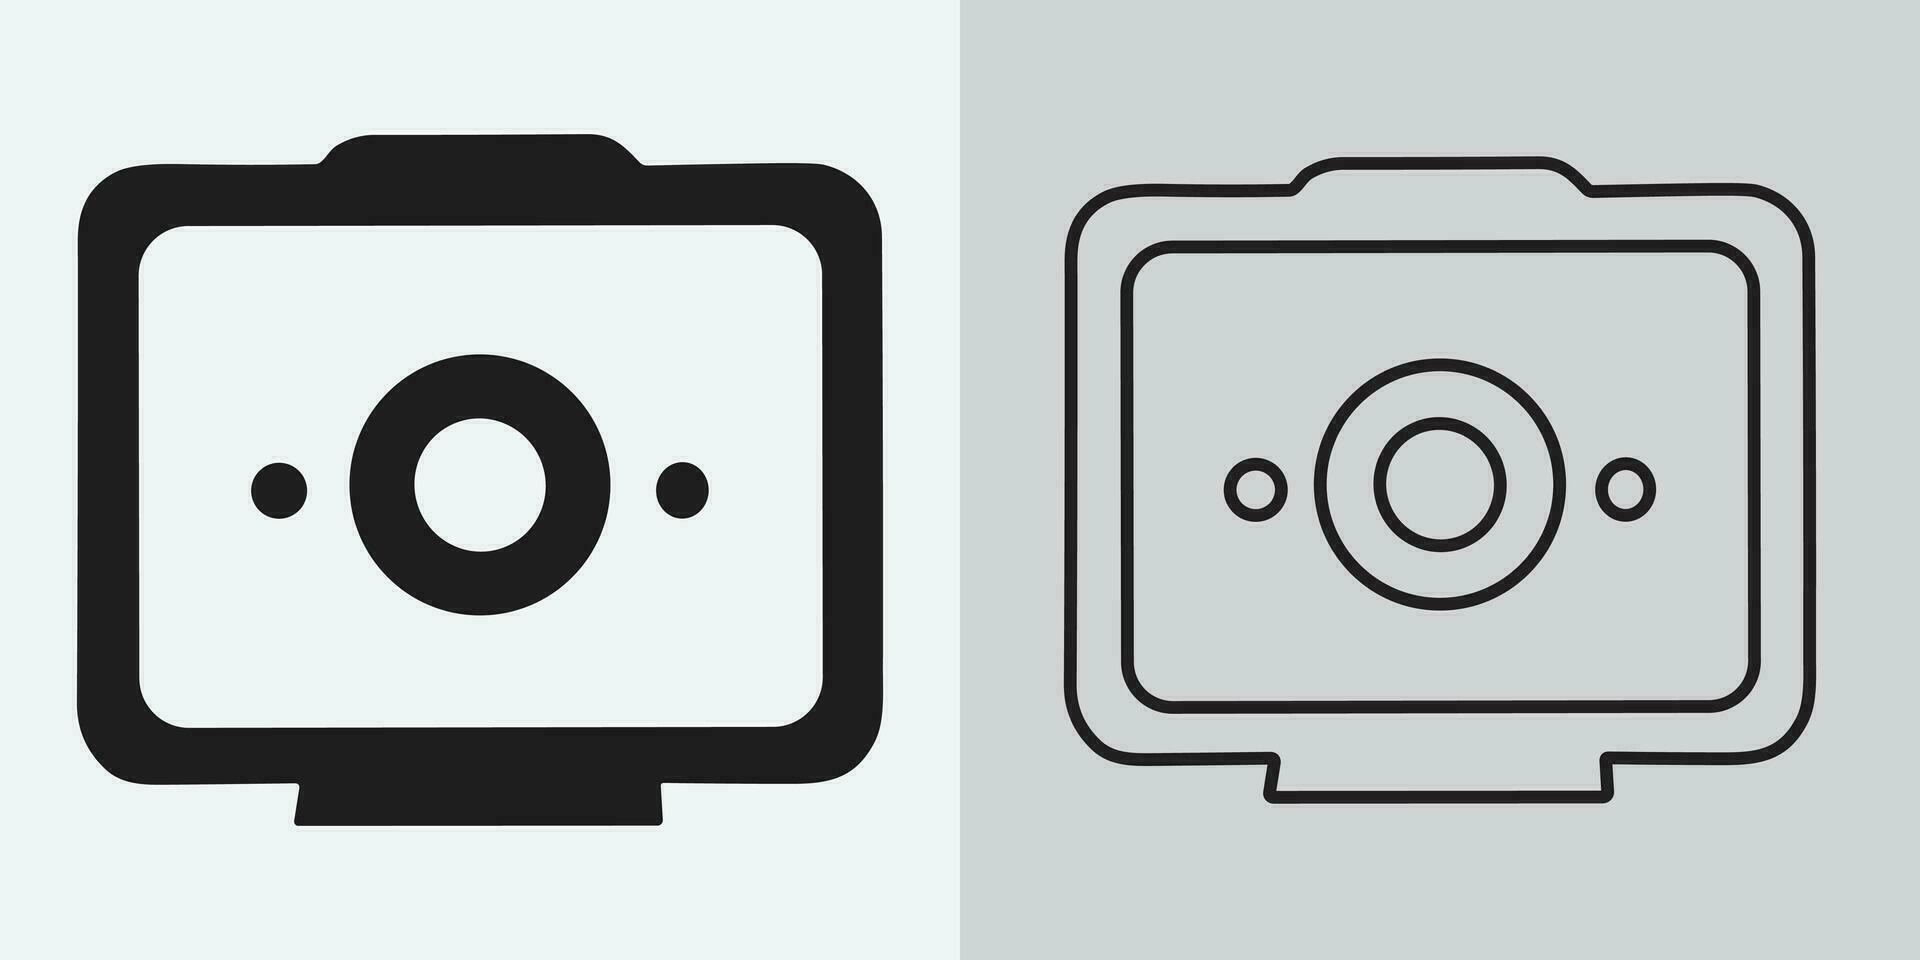 Digital webcam icon design isolated on white background vector